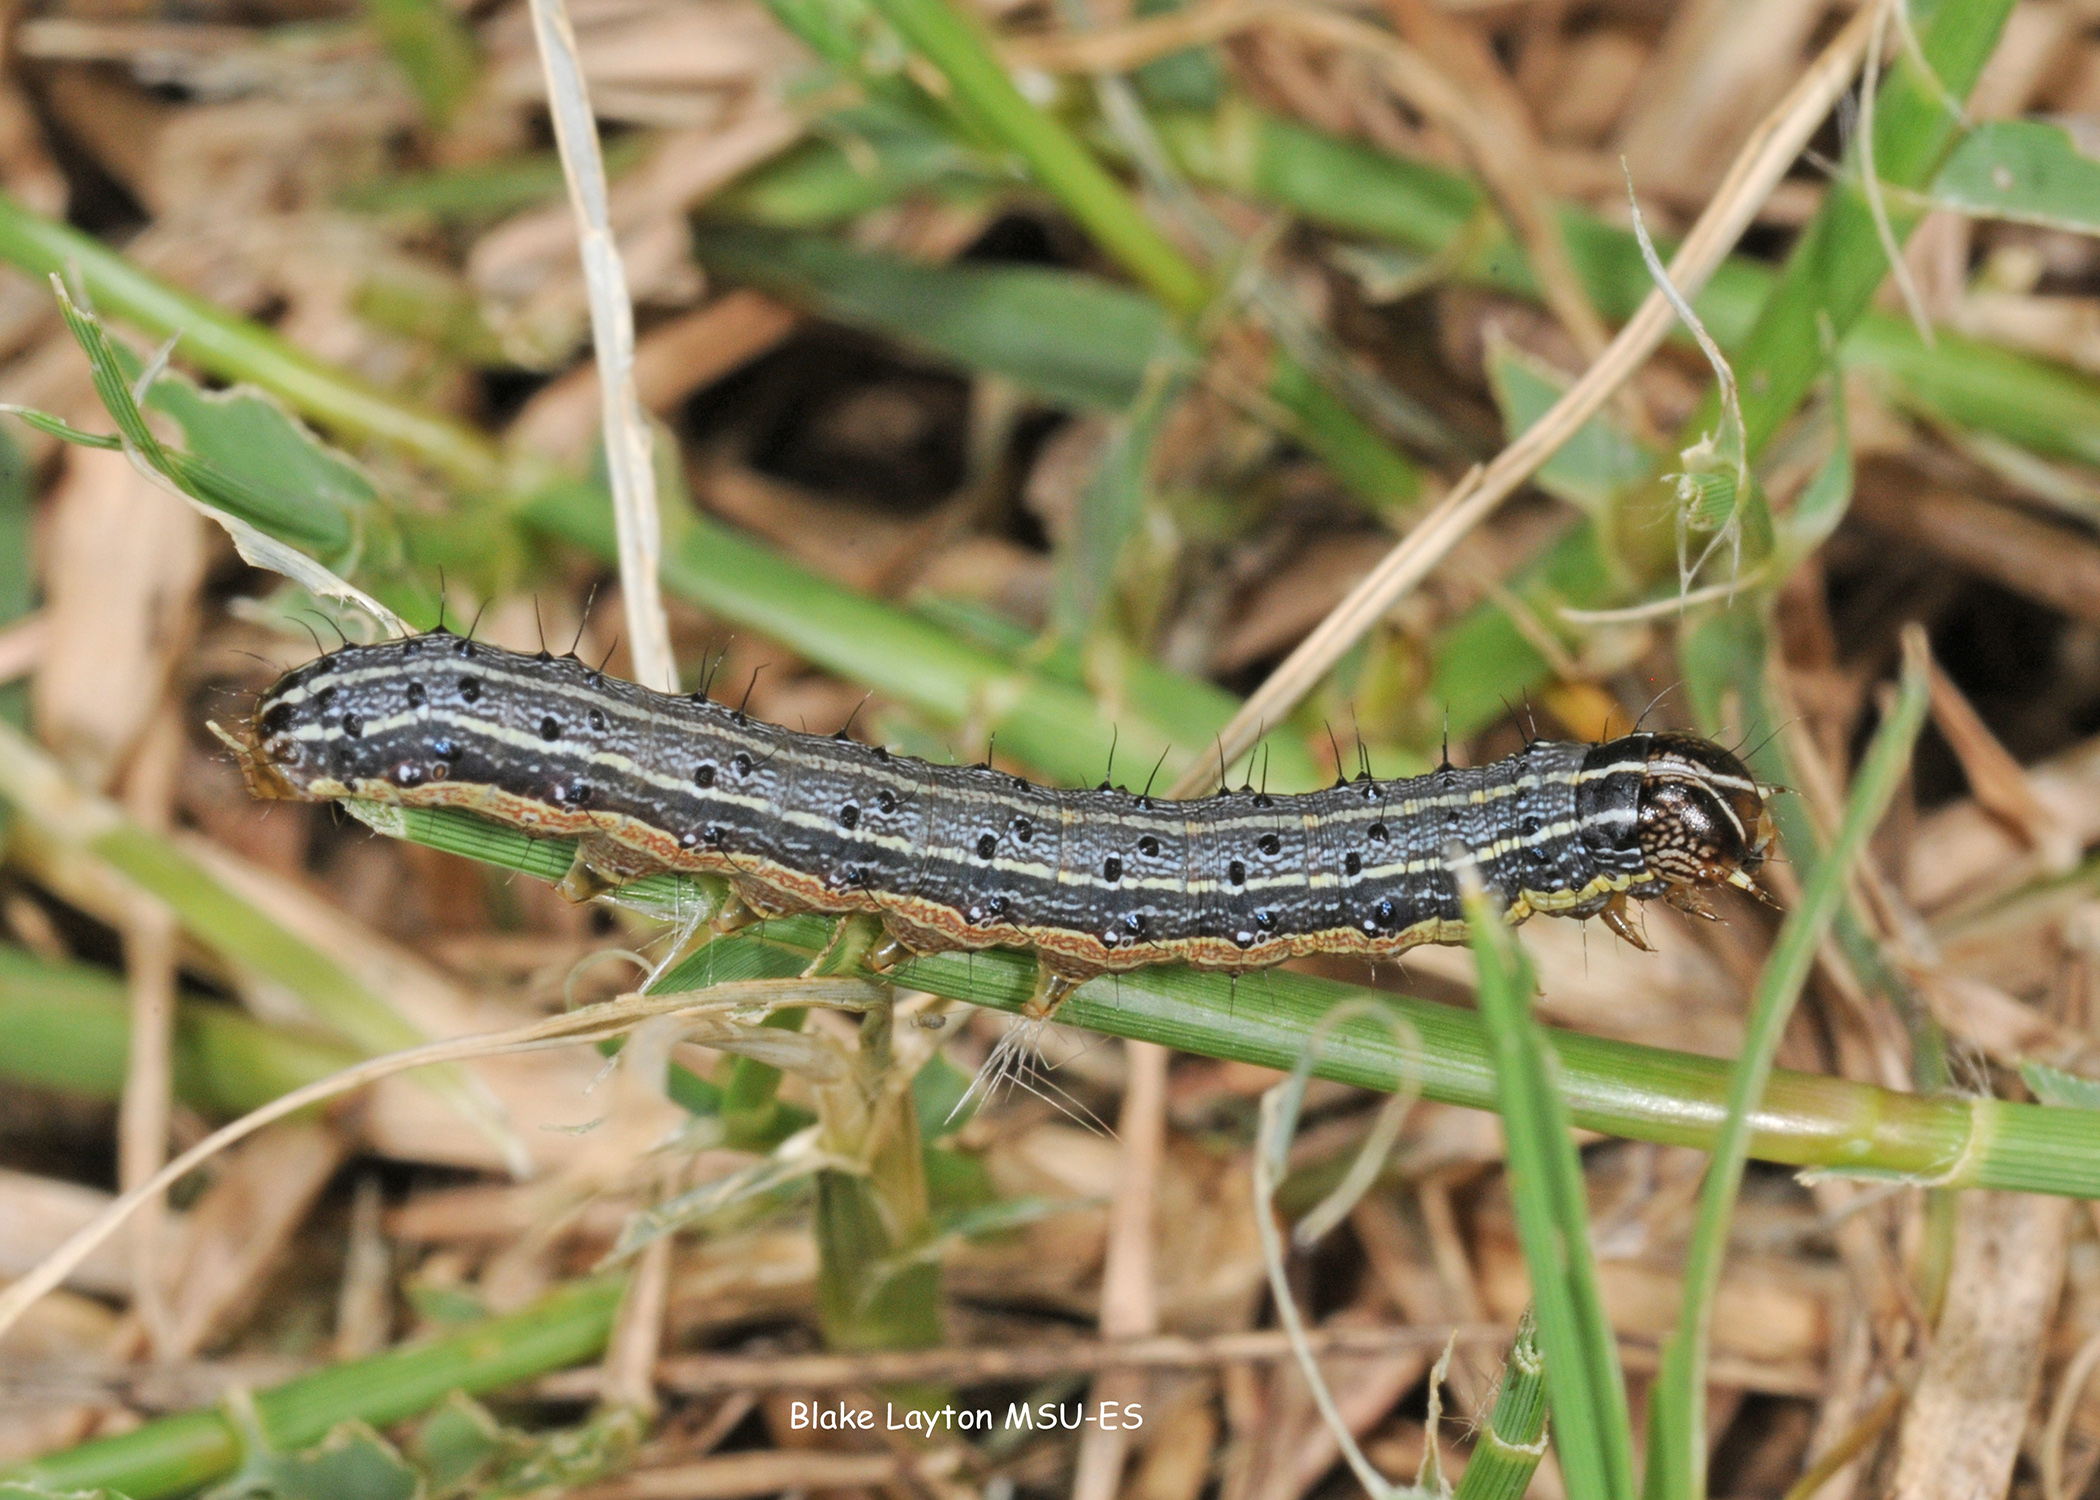 Armyworms in Households by Mario Villarino